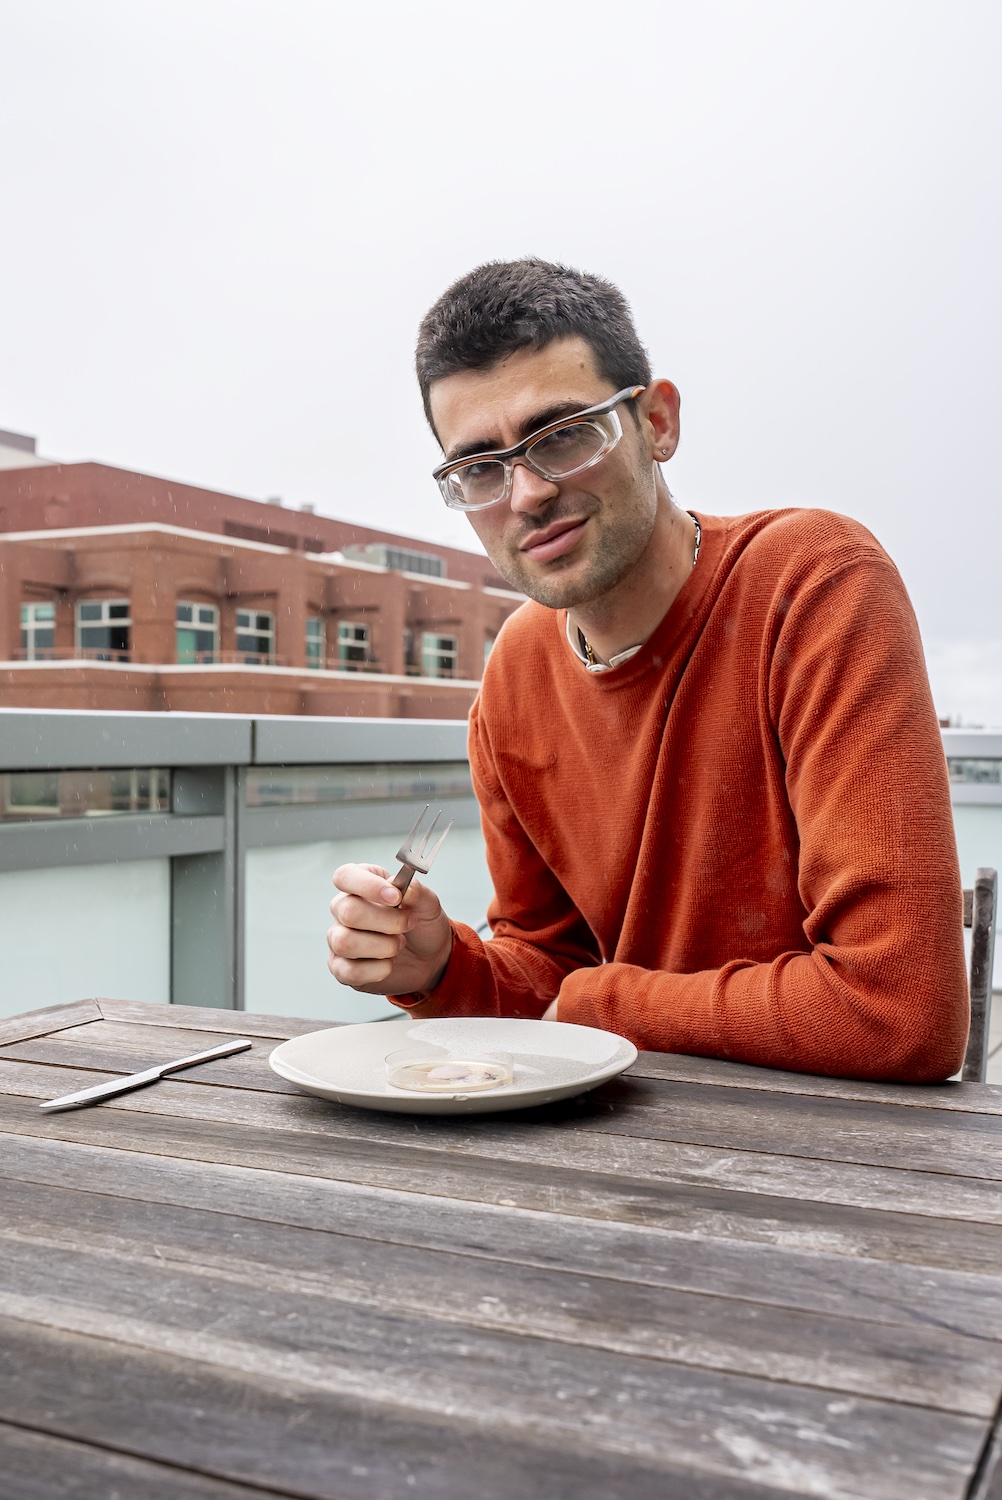 A young man in a long sleeve red top sitting outside on a picnic bench. He is wearing lab goggles and holding a fork. On the table in front of him is a plate containing a petri dish filled with fuzzy mold.